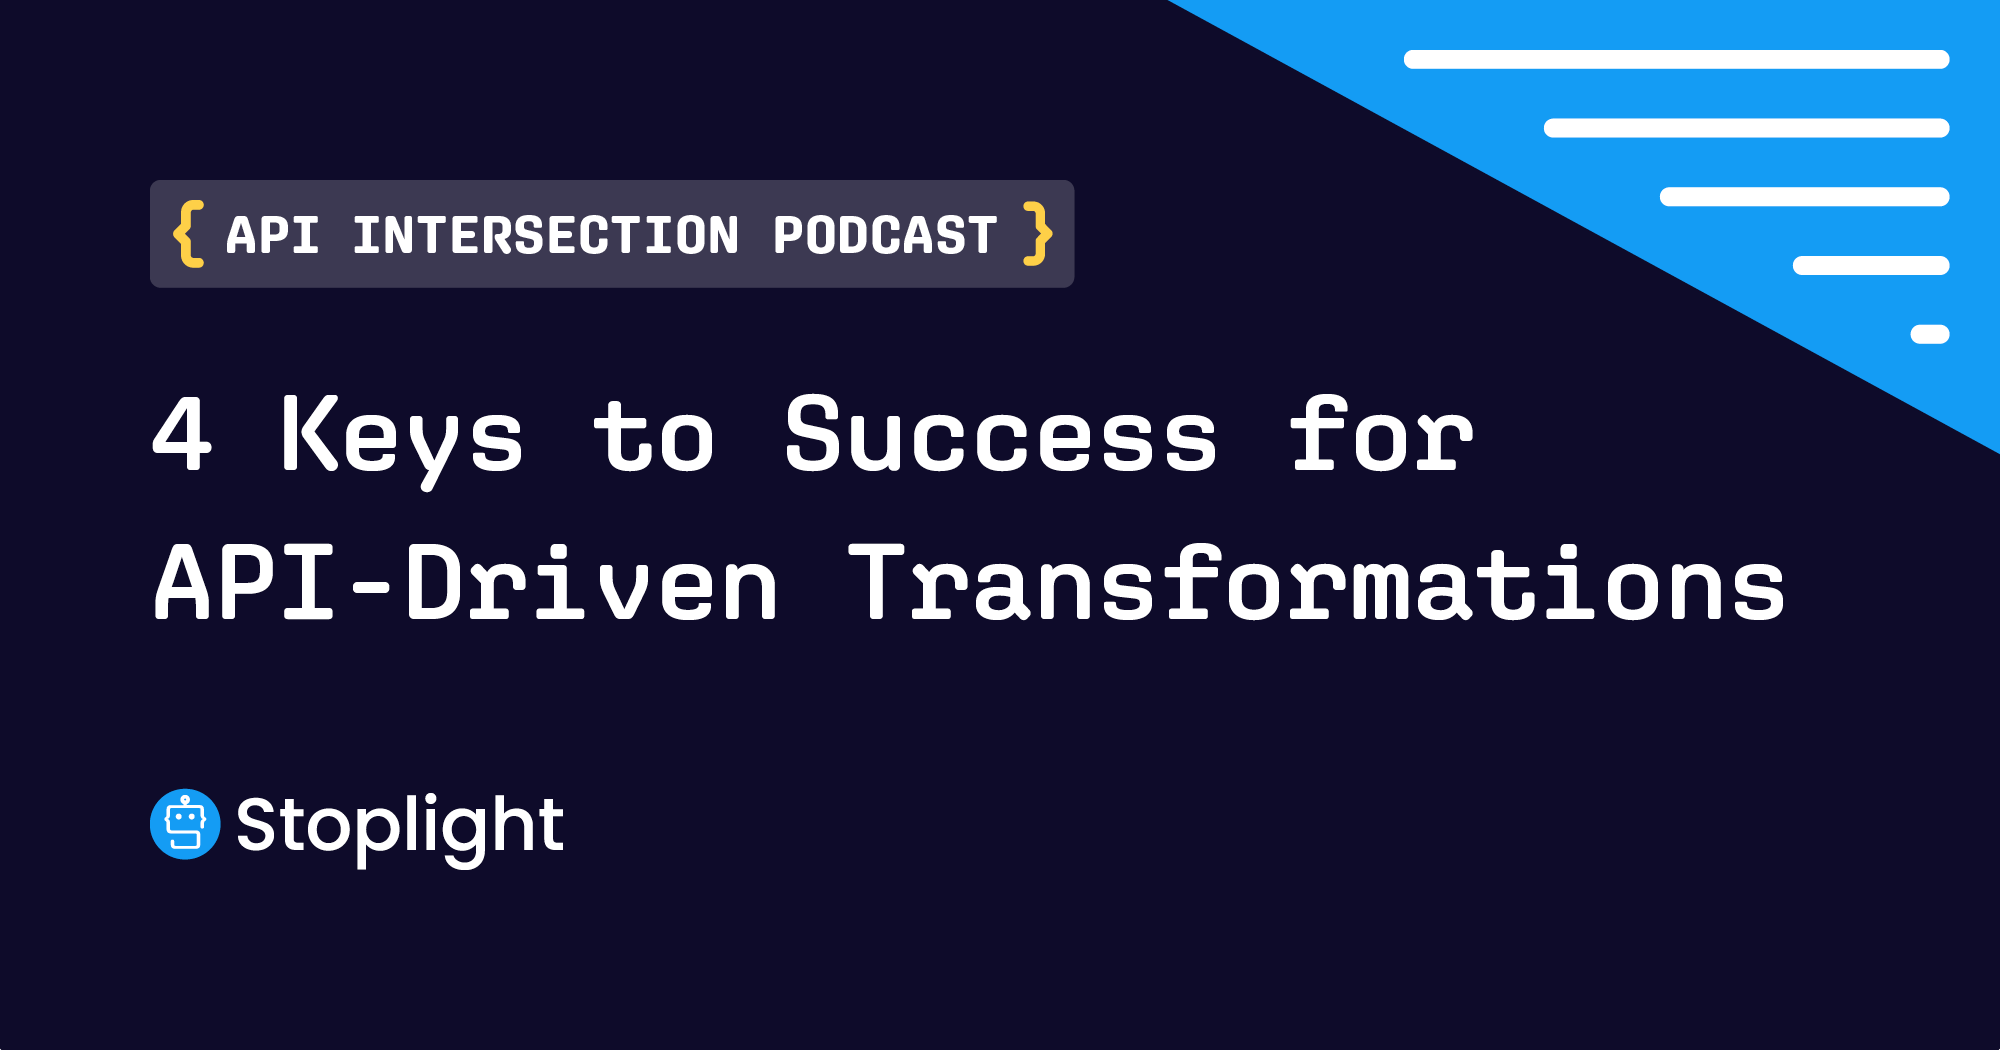 4 Keys to Success for API-Driven Transformations